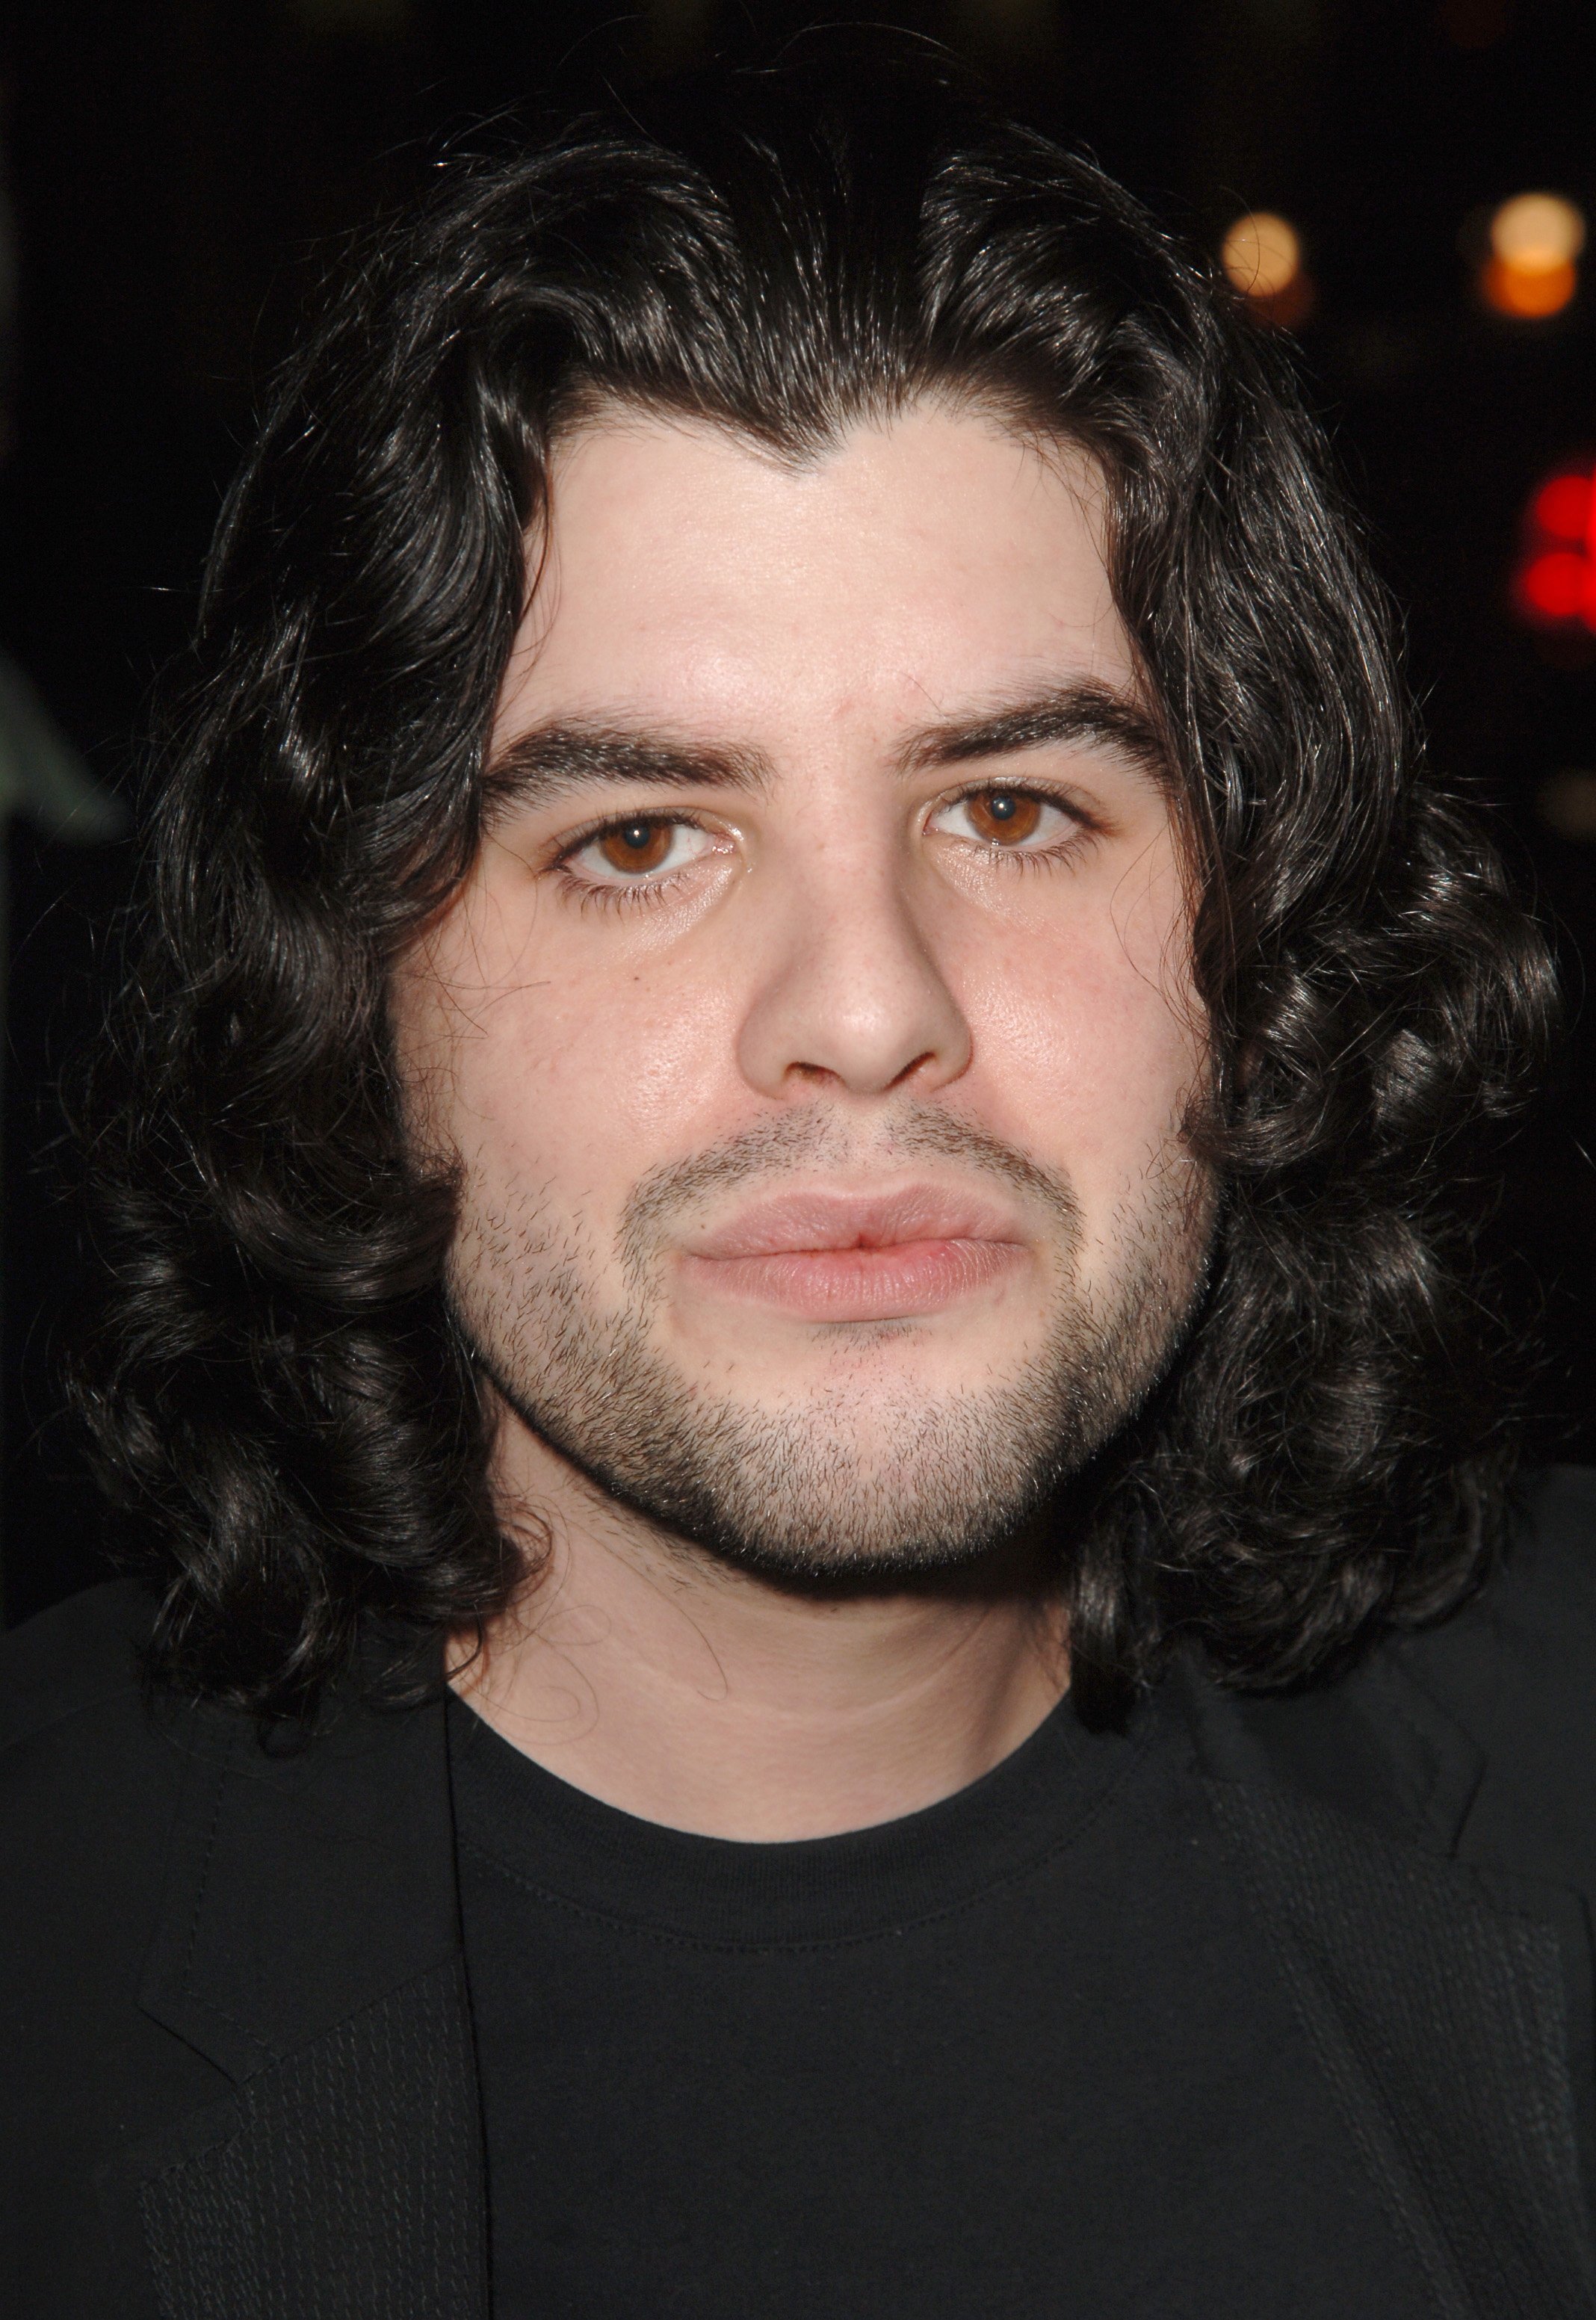  Sage Stallone at "Rocky Balboa" World Premiere in Hollywood | Source: Getty Images